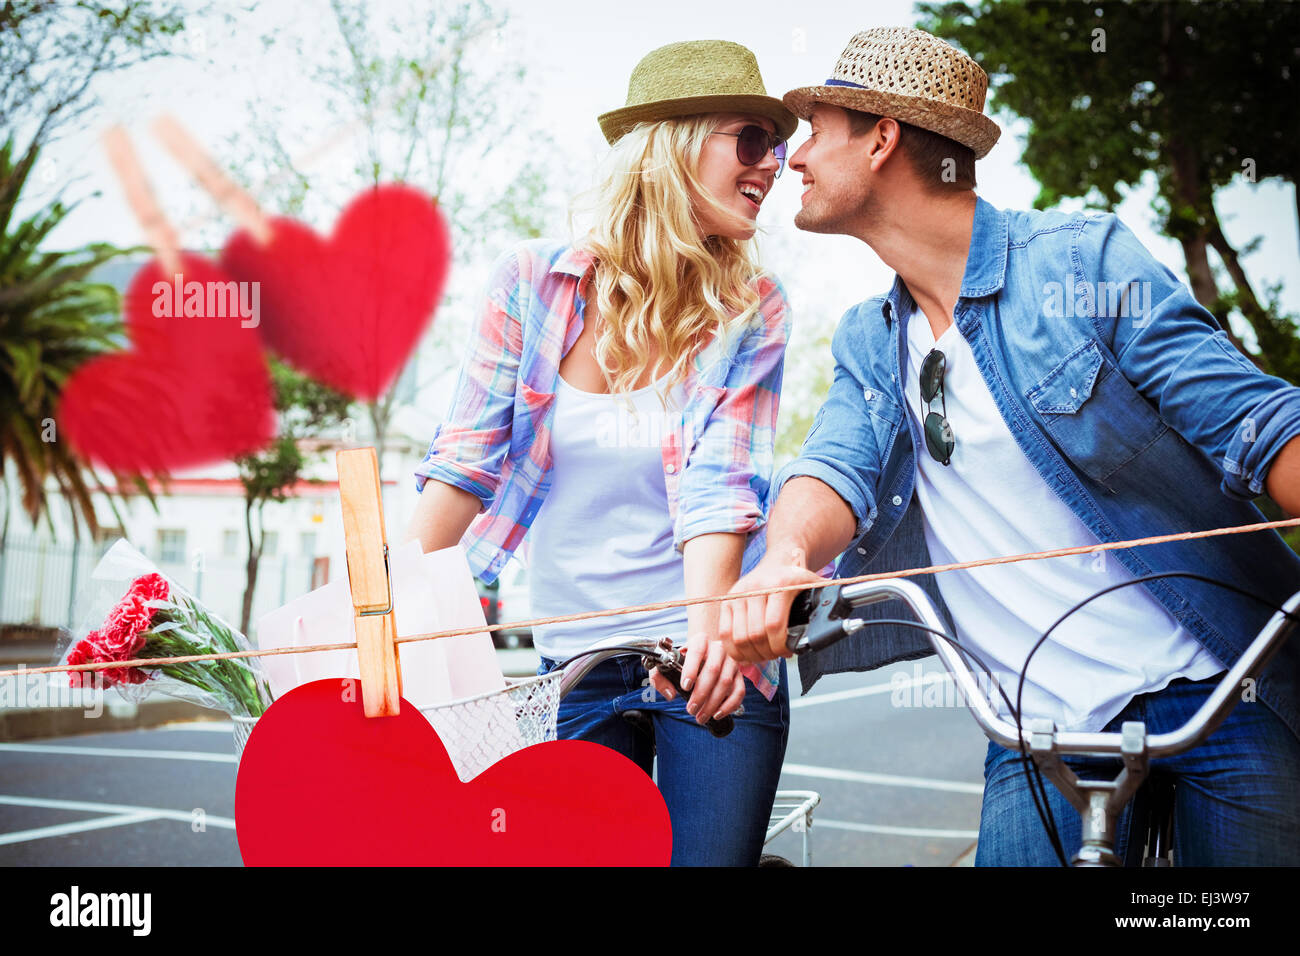 Composite image of hip young couple on a bike ride Stock Photo